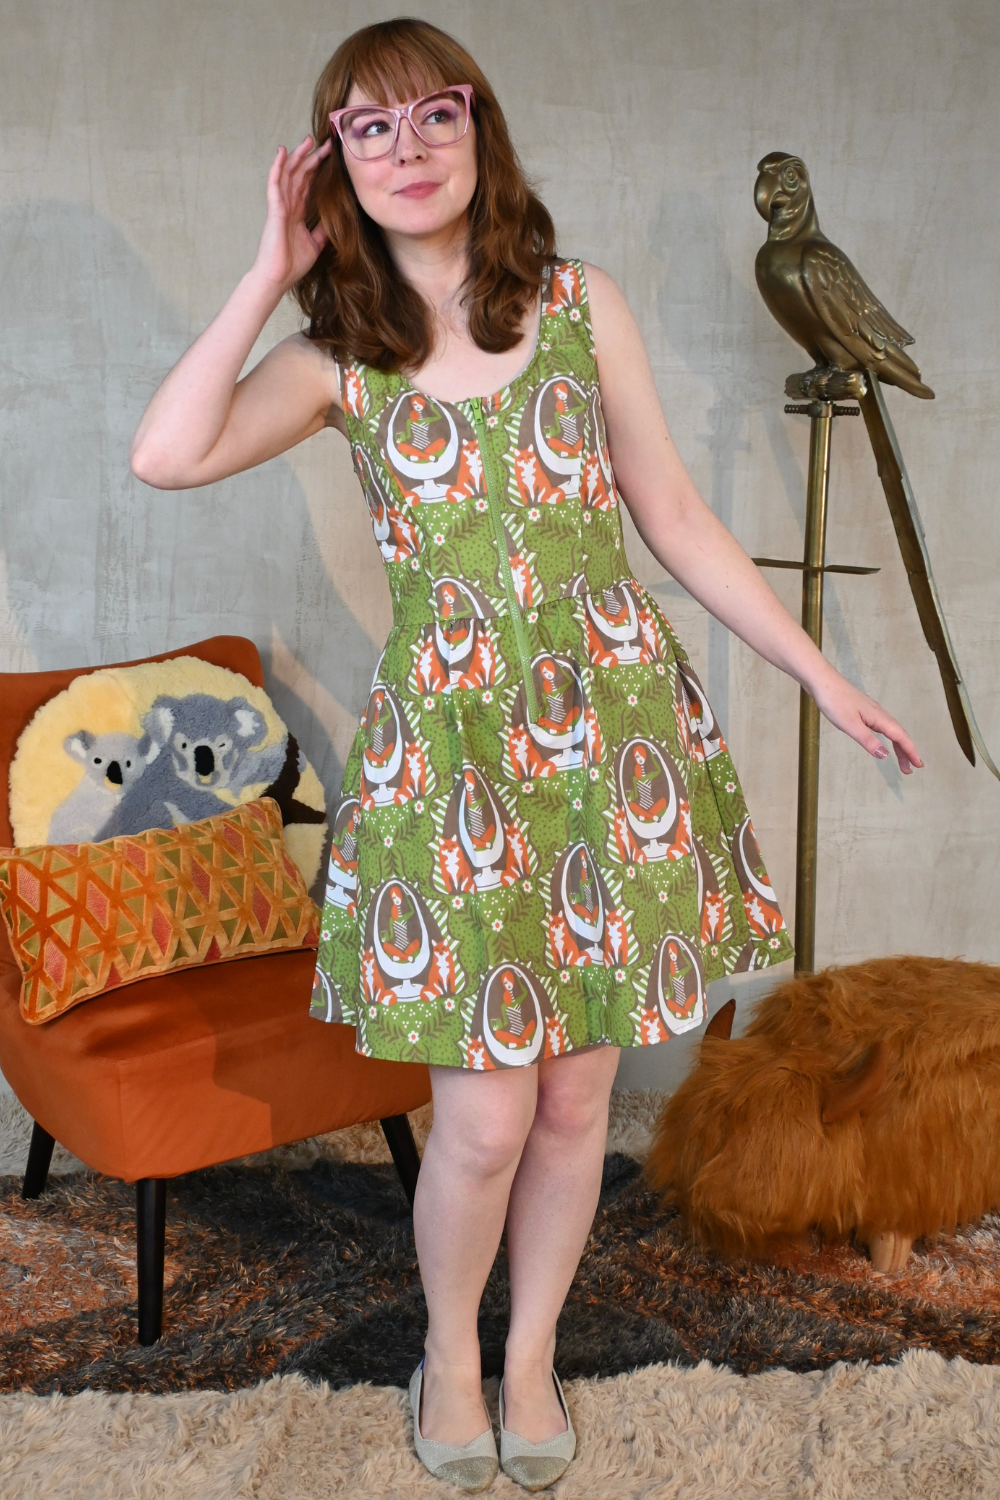 Cute brown-haired model wearing pink glasses and a zip-front olive green dress with orange, white and brown fox and egg chair print